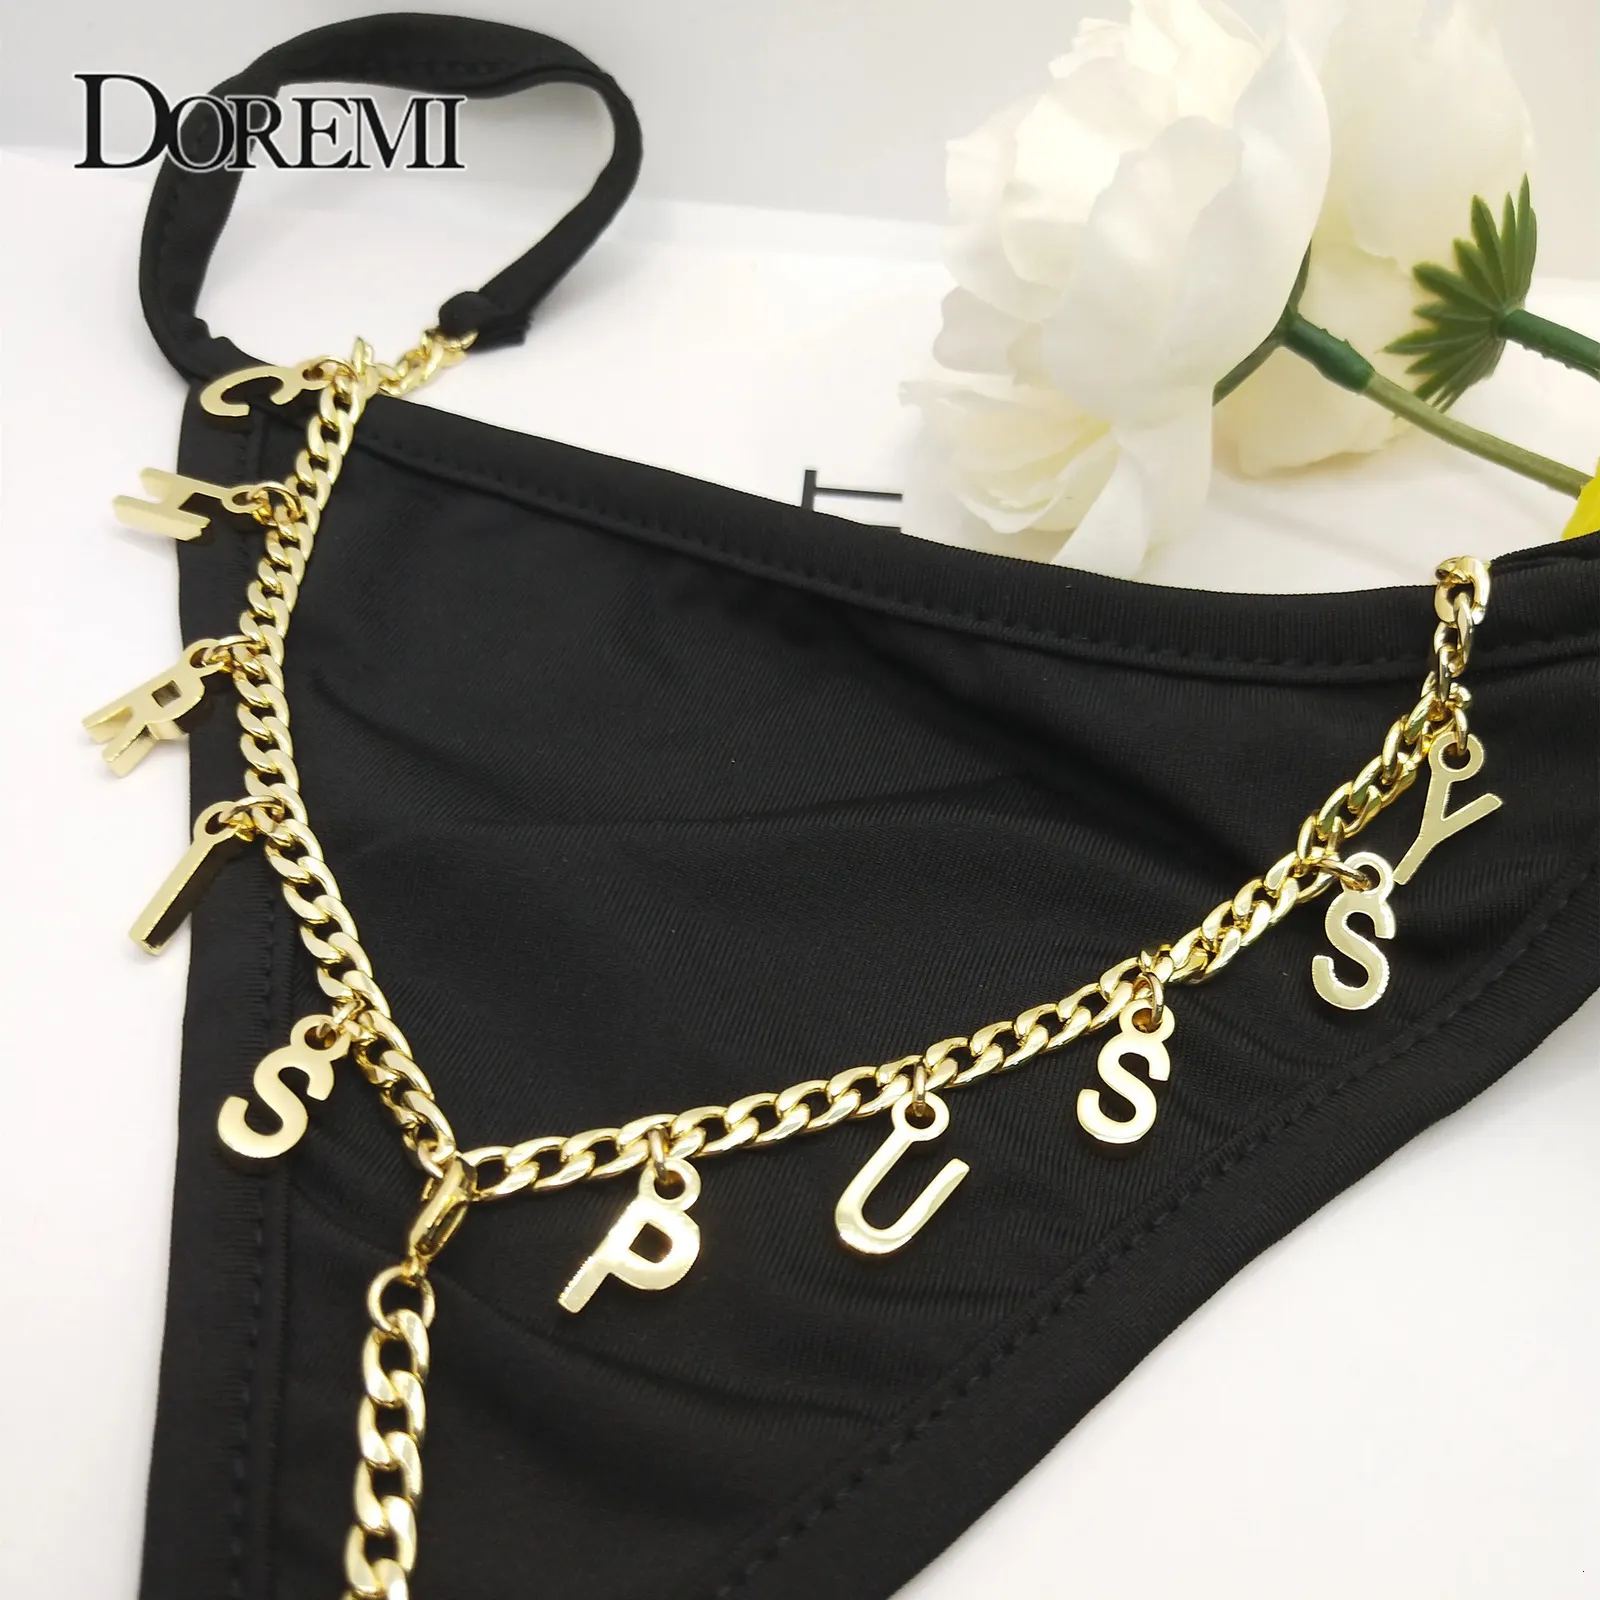 DOREMI Summer Sexy Personalized Name Belly Waist Stainless Steel Chains for Women Body Chain Jewelry Custom Letters Thong PantY 240402